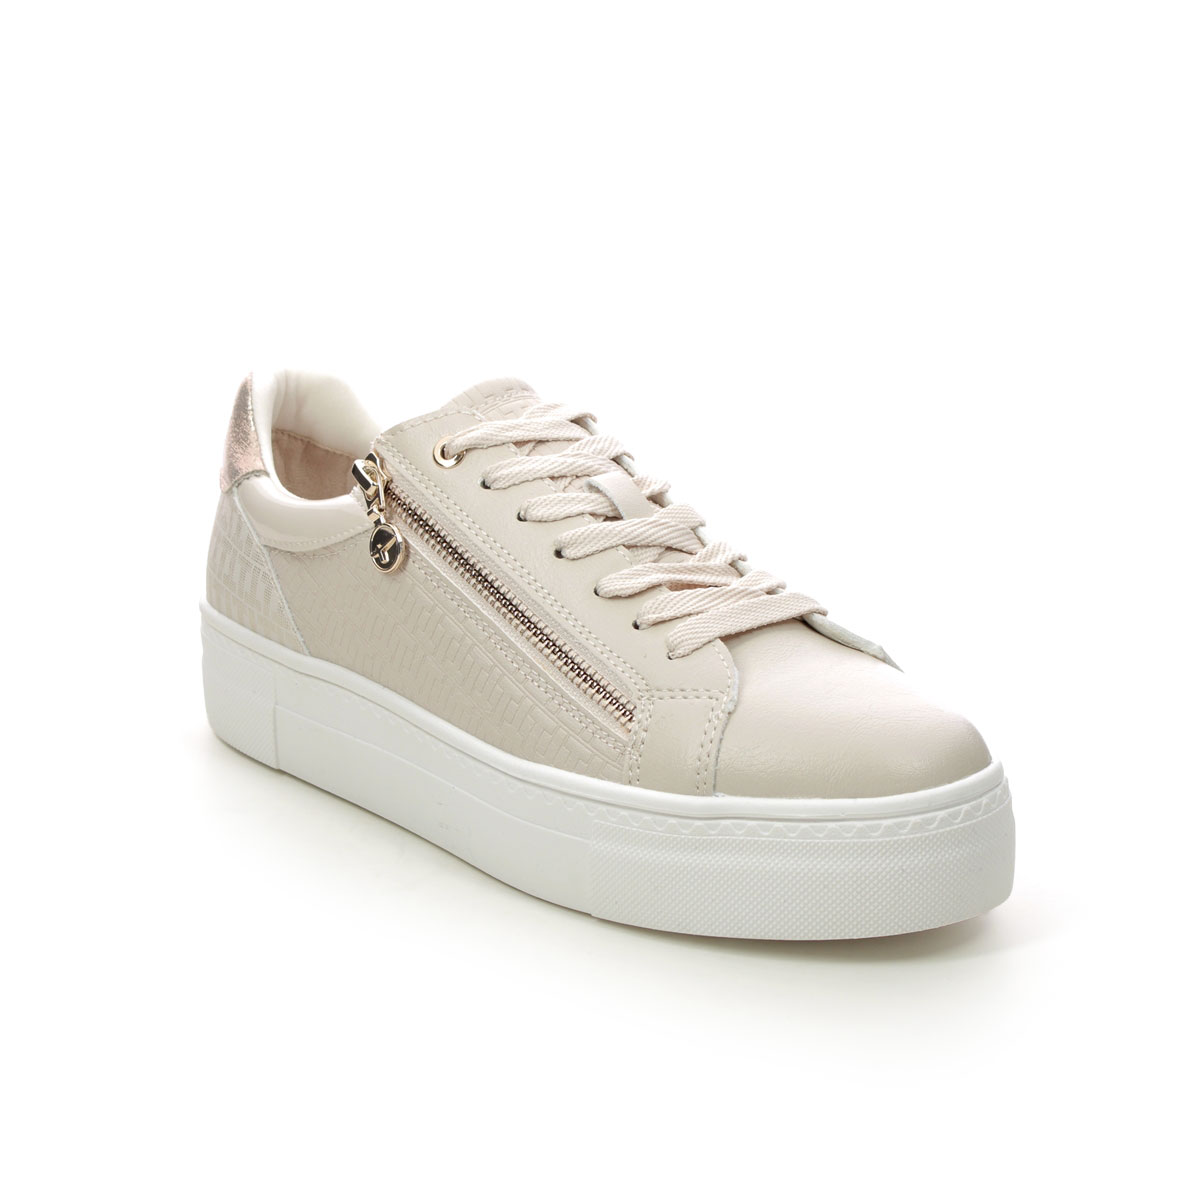 Tamaris Lima Zip Ivory Womens trainers 23313-41-485 in a Plain Man-made in Size 36